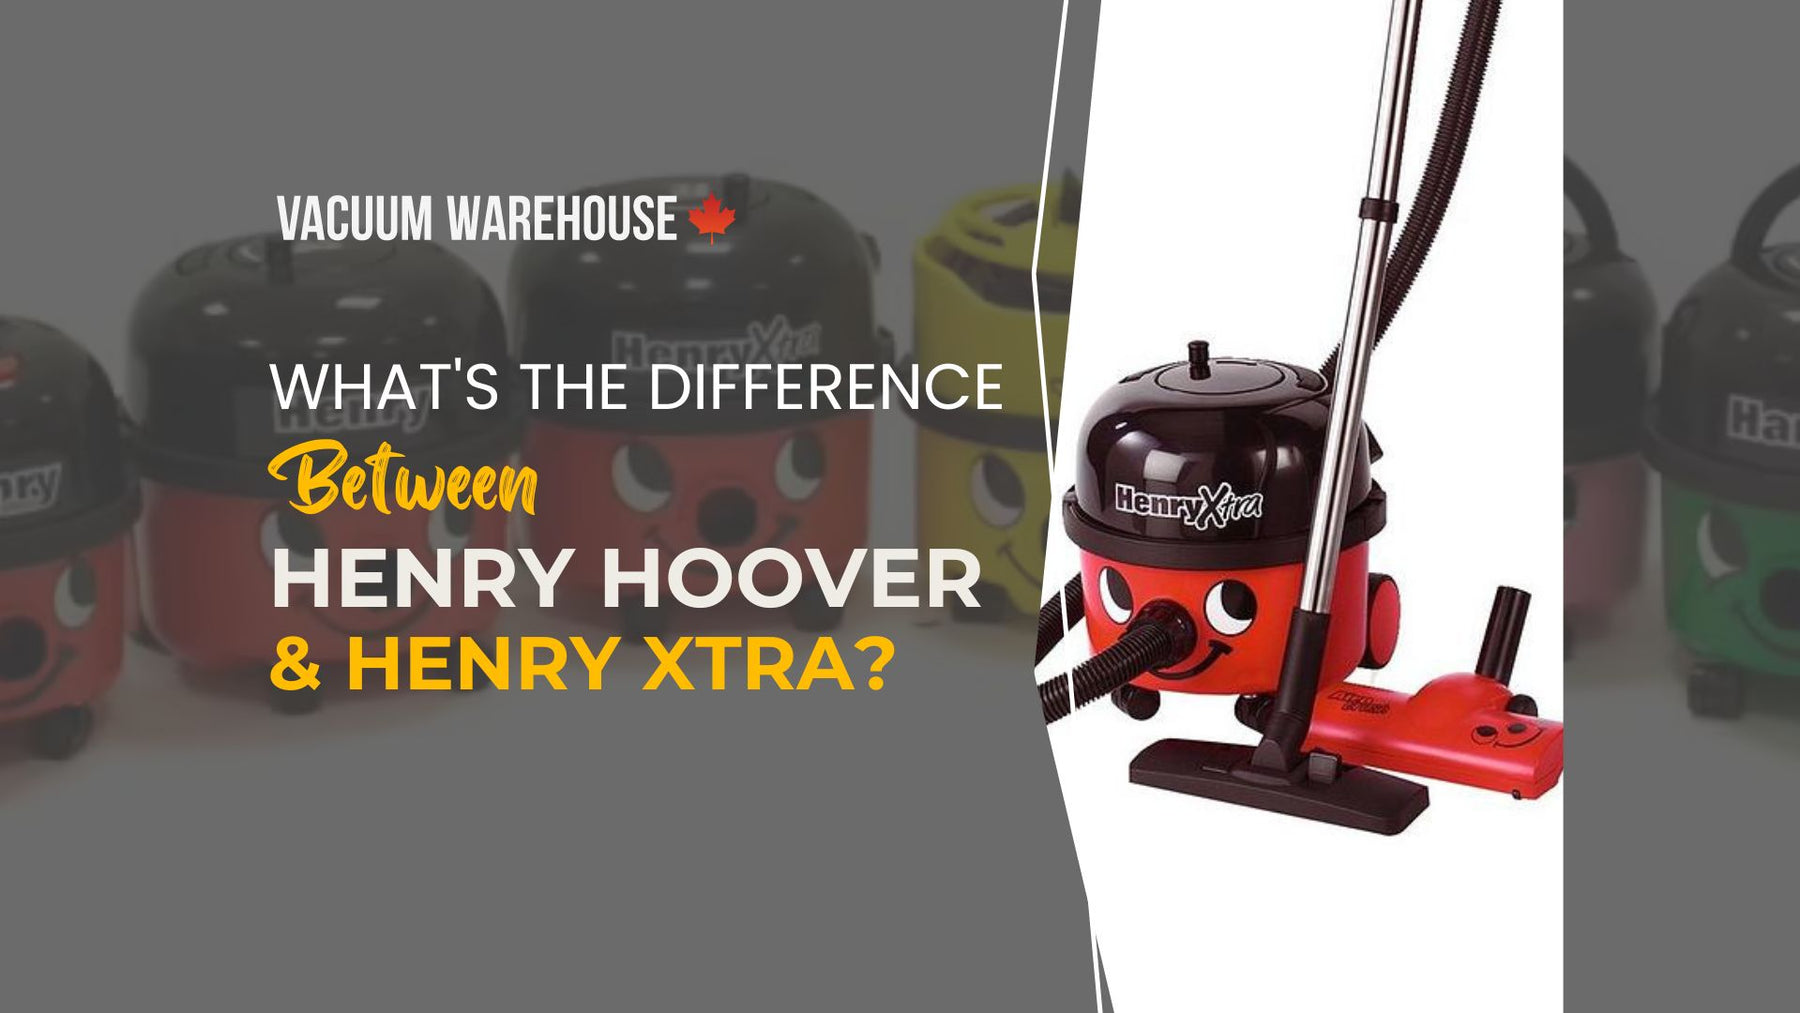 What's the difference between Henry Hoover and Henry Xtra?